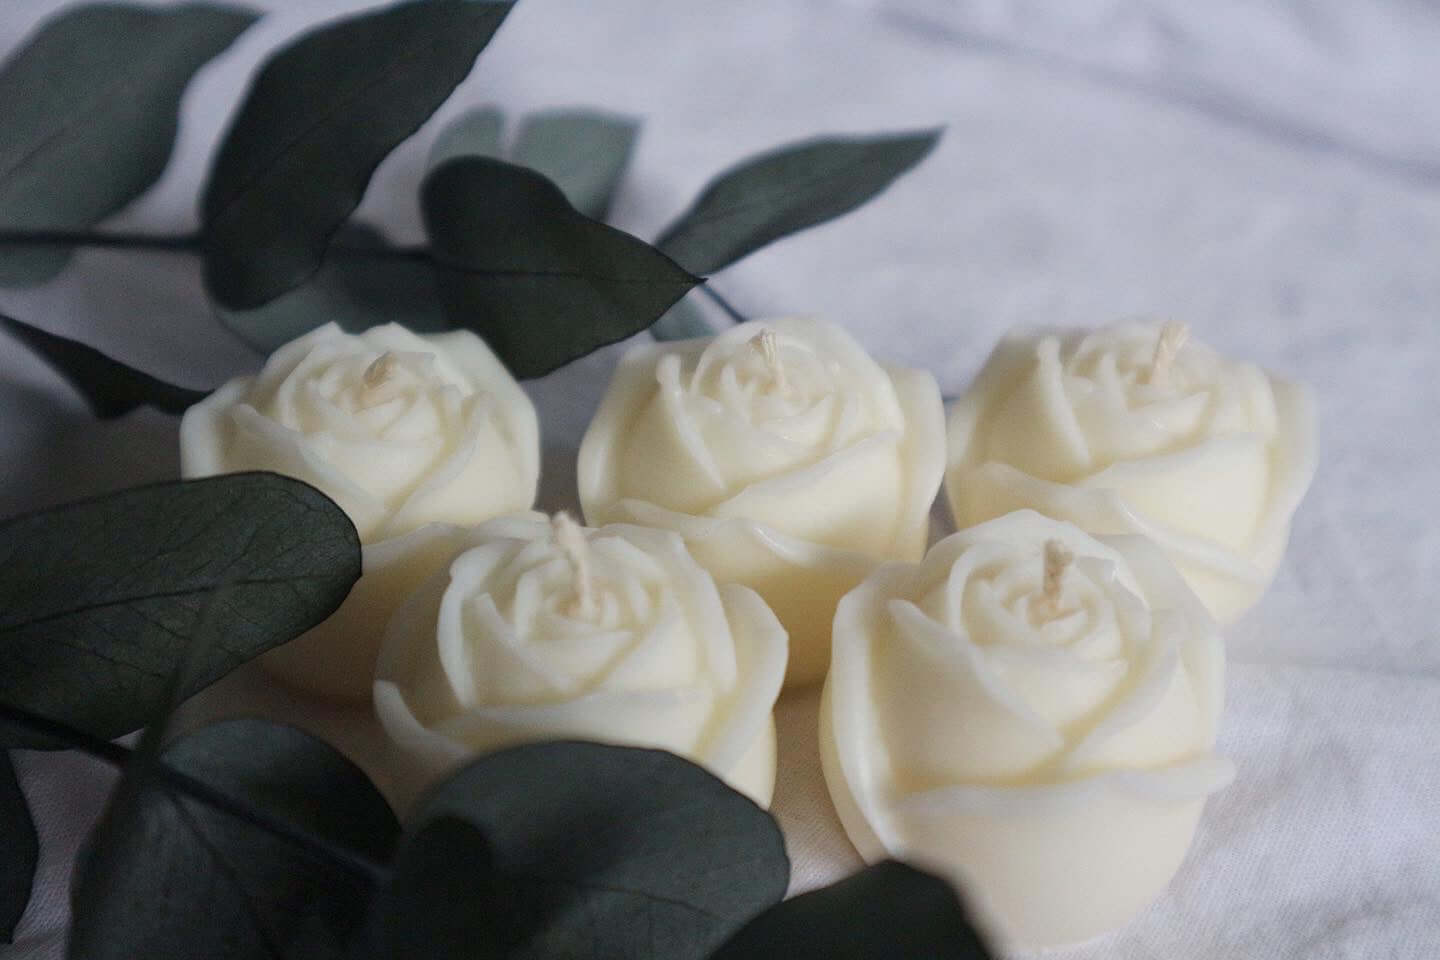 Mini rosa rose design candle | Flower Candles | Home Decoration Ideas | Centerpiece Ideas | Candle Decorations | Sculptural Candles | Sculptural Candles Australia | Free Standing Candles | Clean Burning Candles | Sculpted Candles | Australian Made Candles